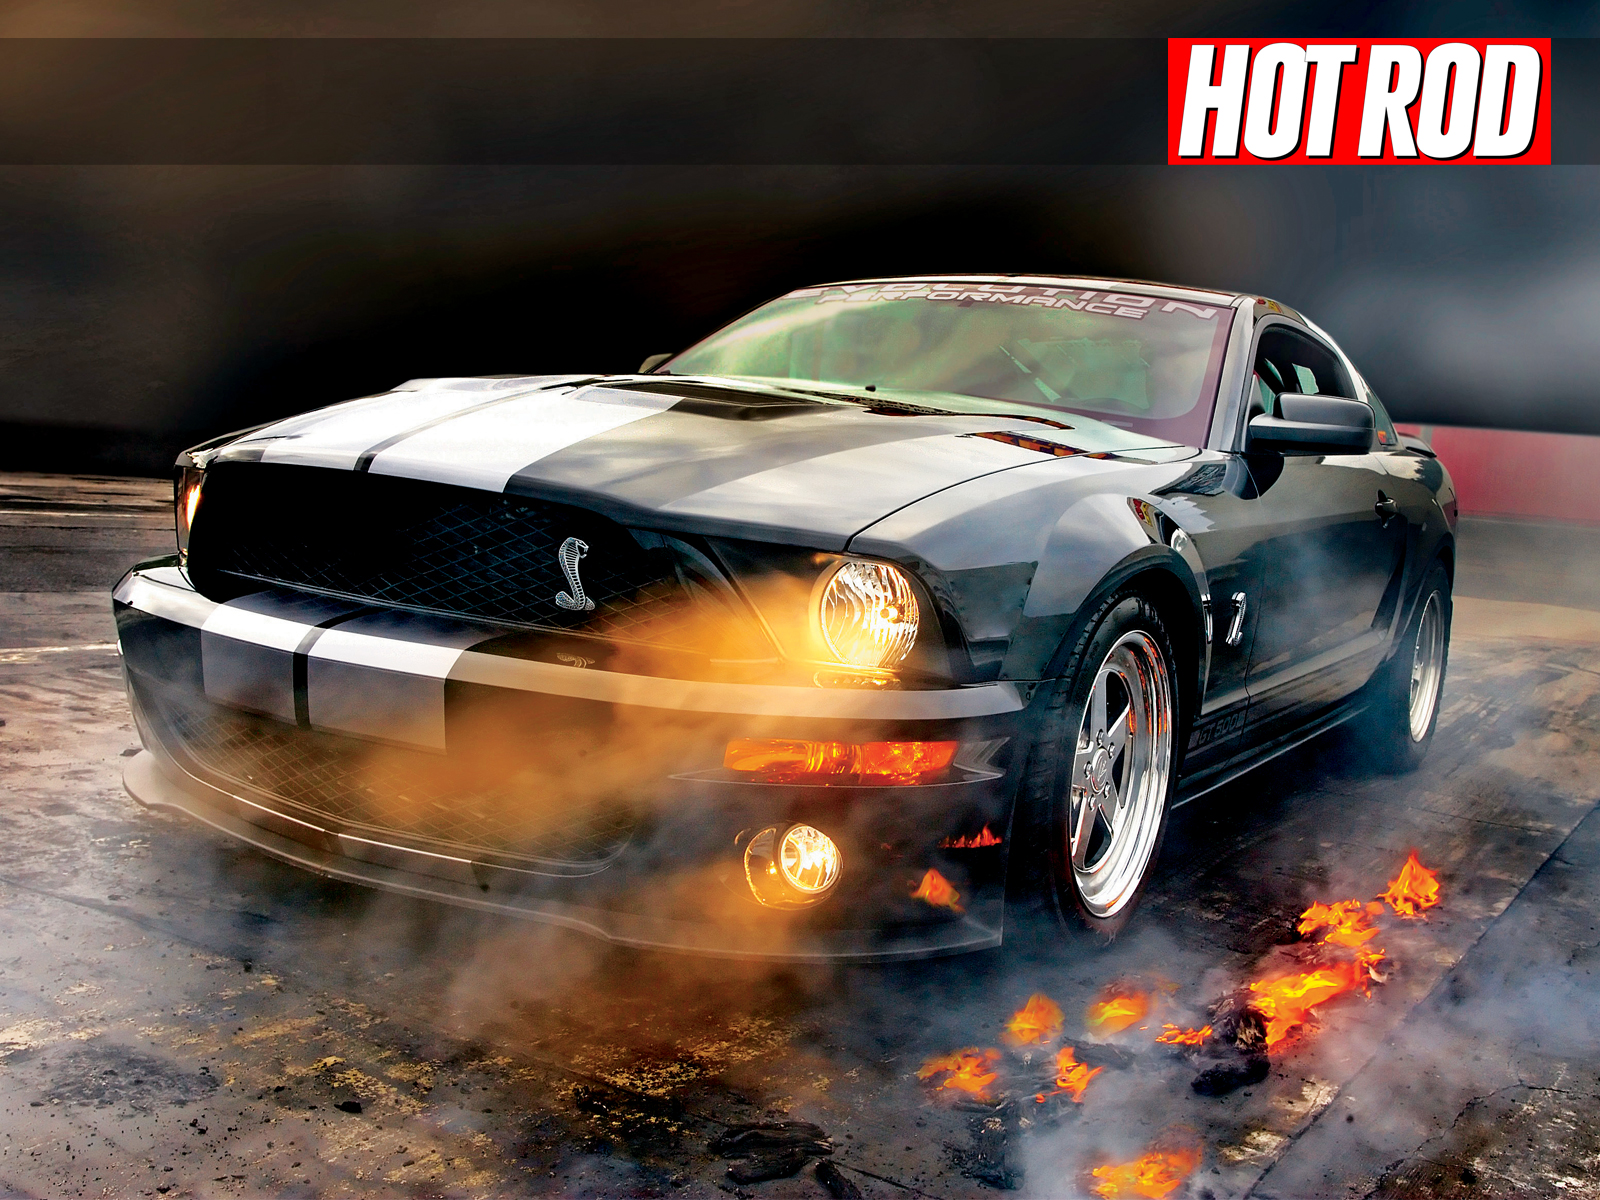 cars wallpapers for desktopCool cars pictures for desktopCool cars